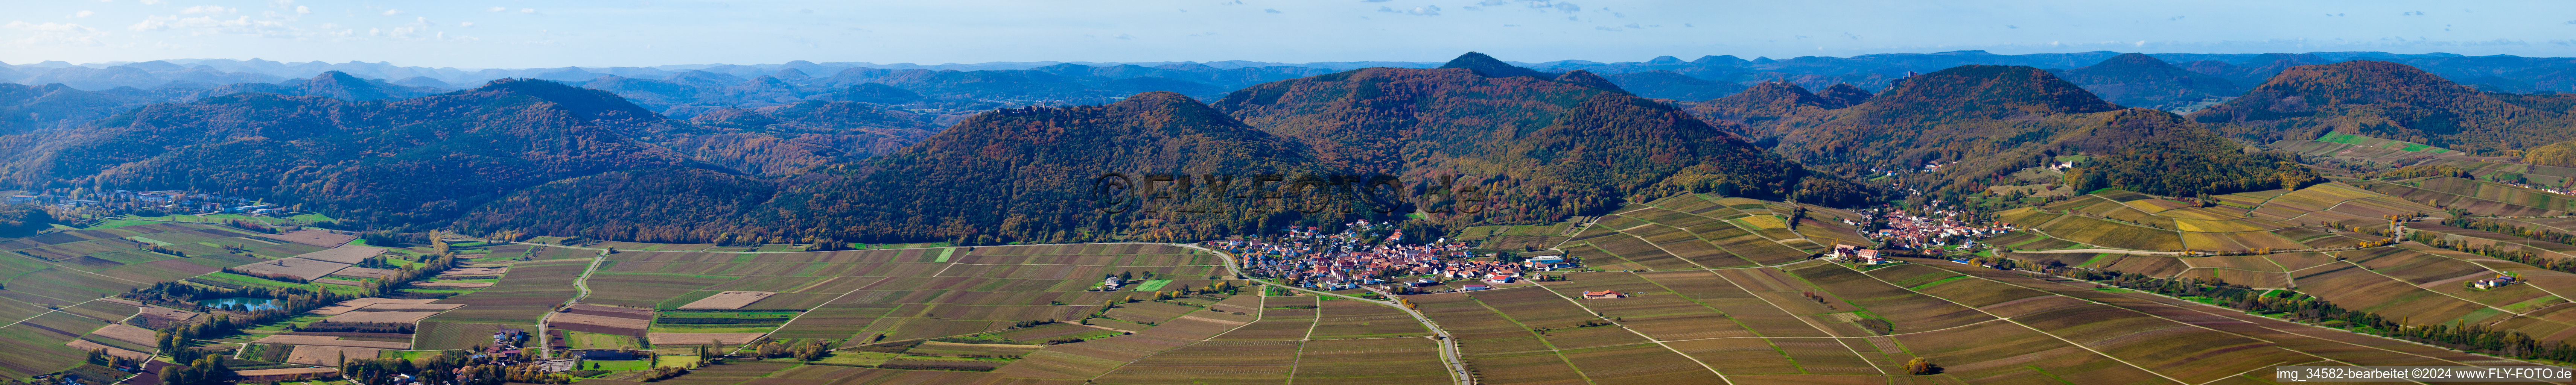 Aerial view of Panoramic perspective Forest and mountain scenery of edge of Haardt of palatinat forestn in Eschbach in the state Rhineland-Palatinate